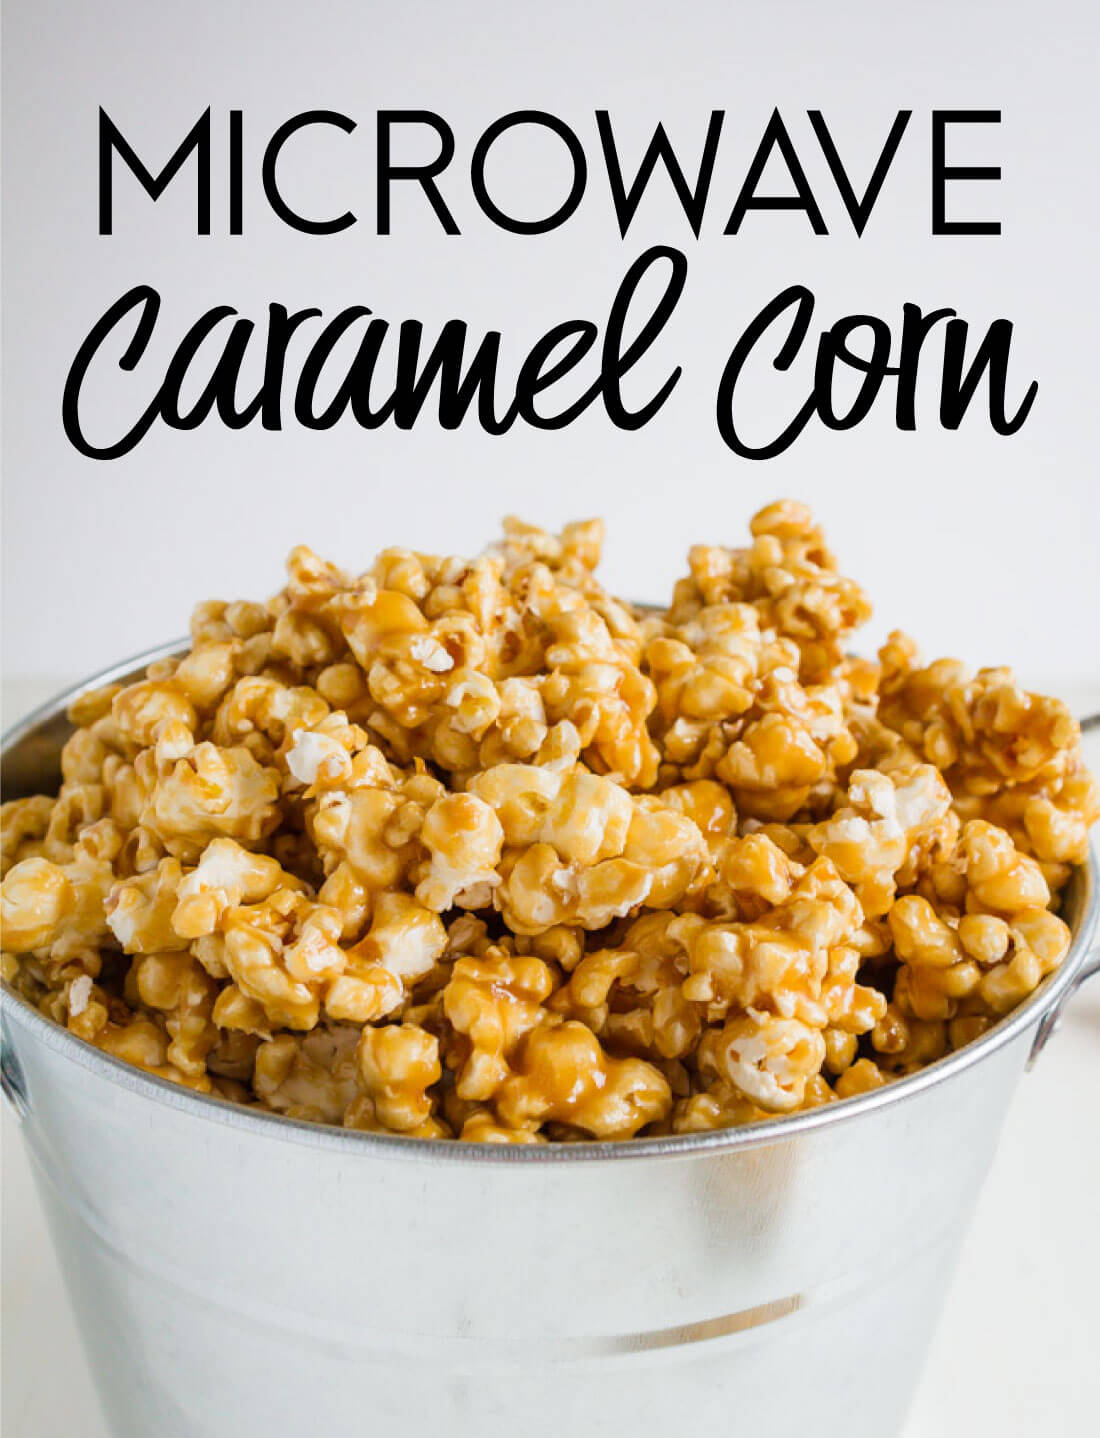 Microwave Caramel Corn - using ingredients you probably already have on hand, make this easy caramel corn.